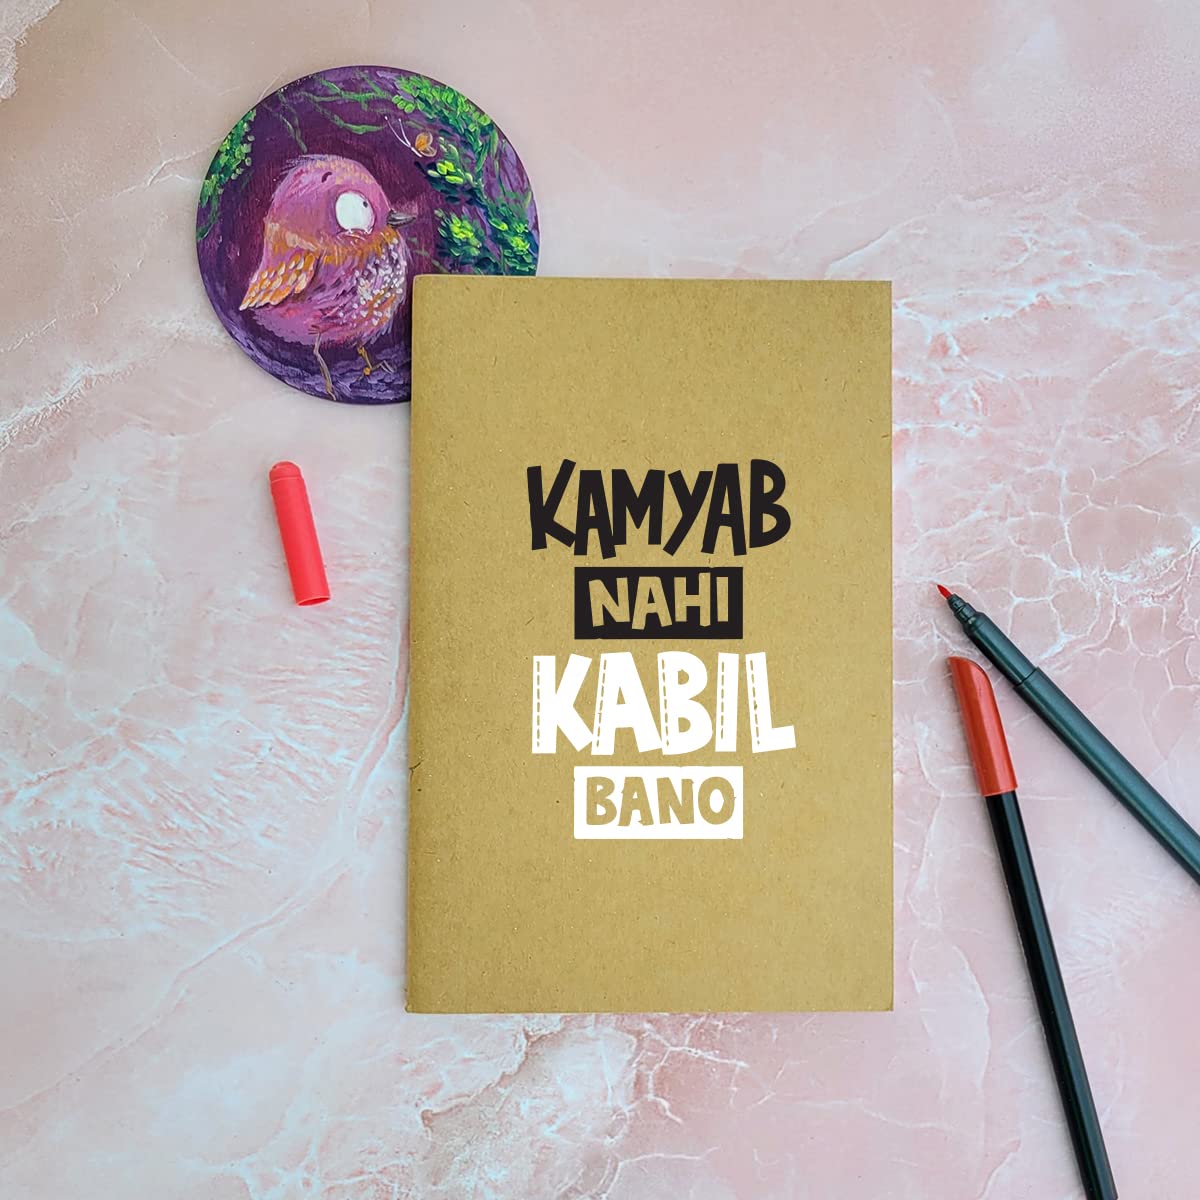 Kamyab Nahi Kabil bano - Brown A5 Doodle Notebook - Kraft Cover Notebook - A5 - 300 GSM Kraft Cover - Handmade - Unruled - 80 Pages - Natural Shade Pages 120 GSM- Funny Quotes & Quirky, Funky designs